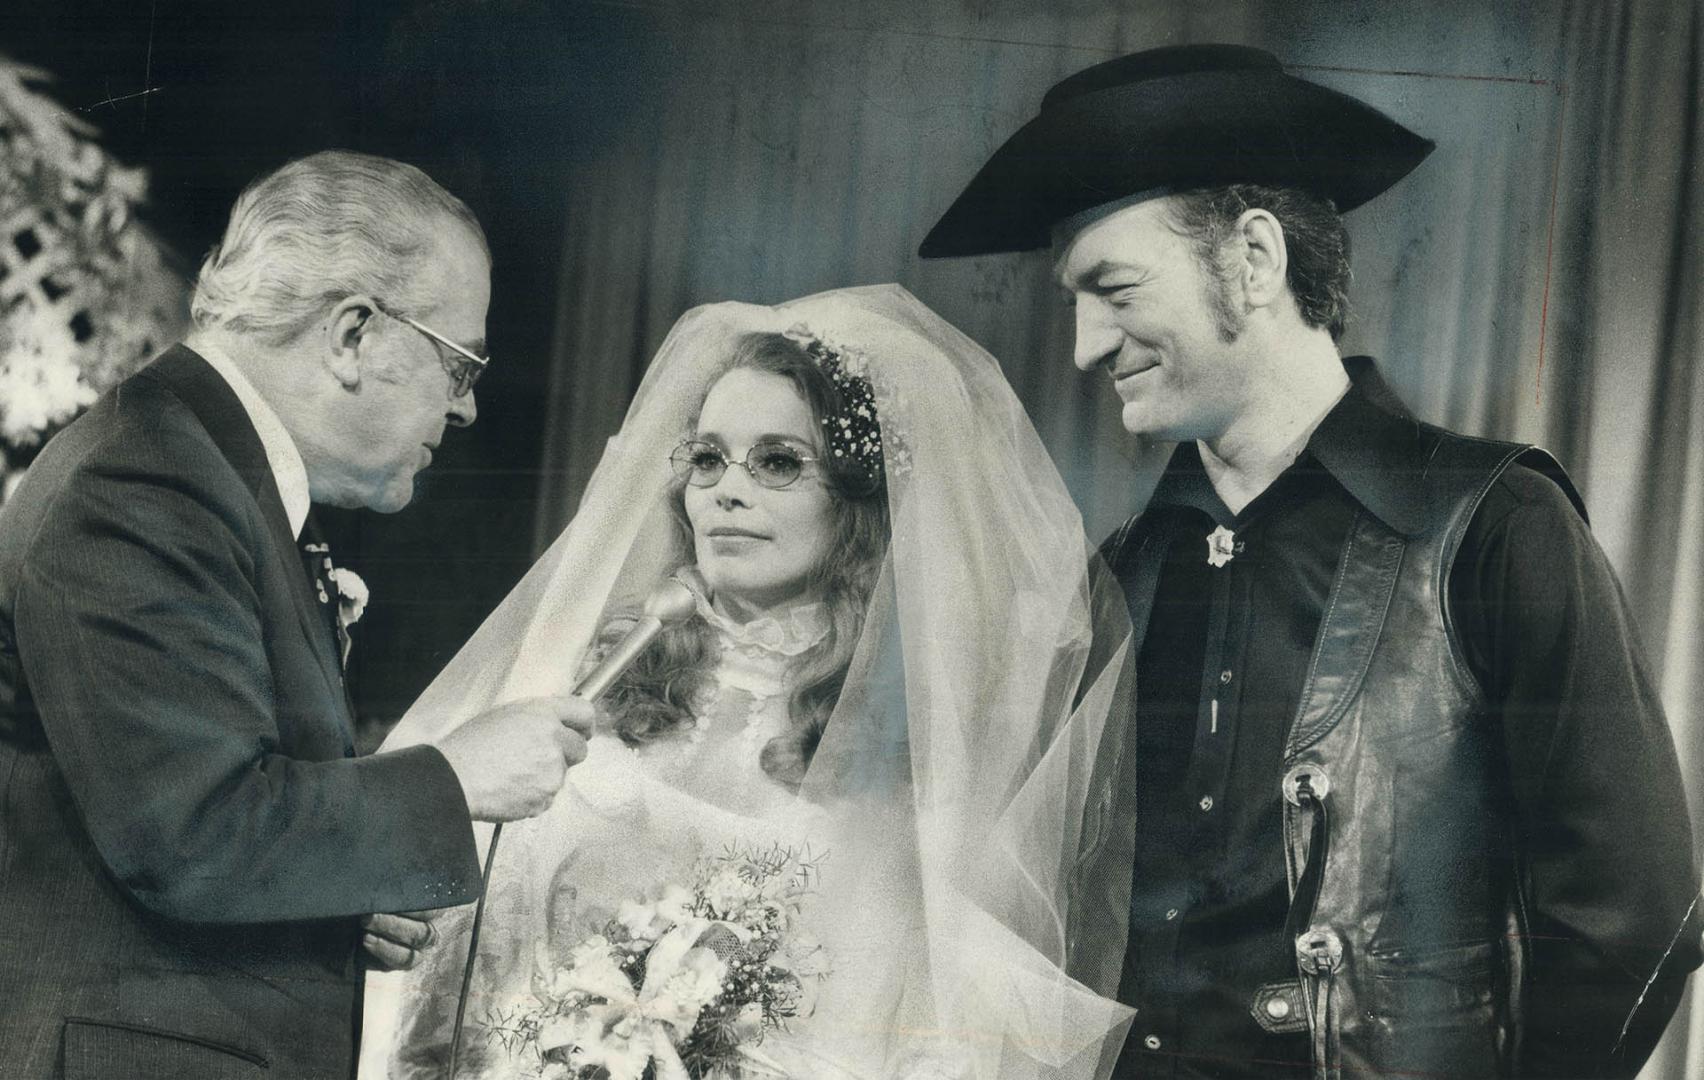 Happiest moment of my life, says Stompin' Tom Connors as he weds Lena Welsh, 26 Magdalen Islands barmaid, on Elwood Glovers TV show, Luncheon Date tod(...)